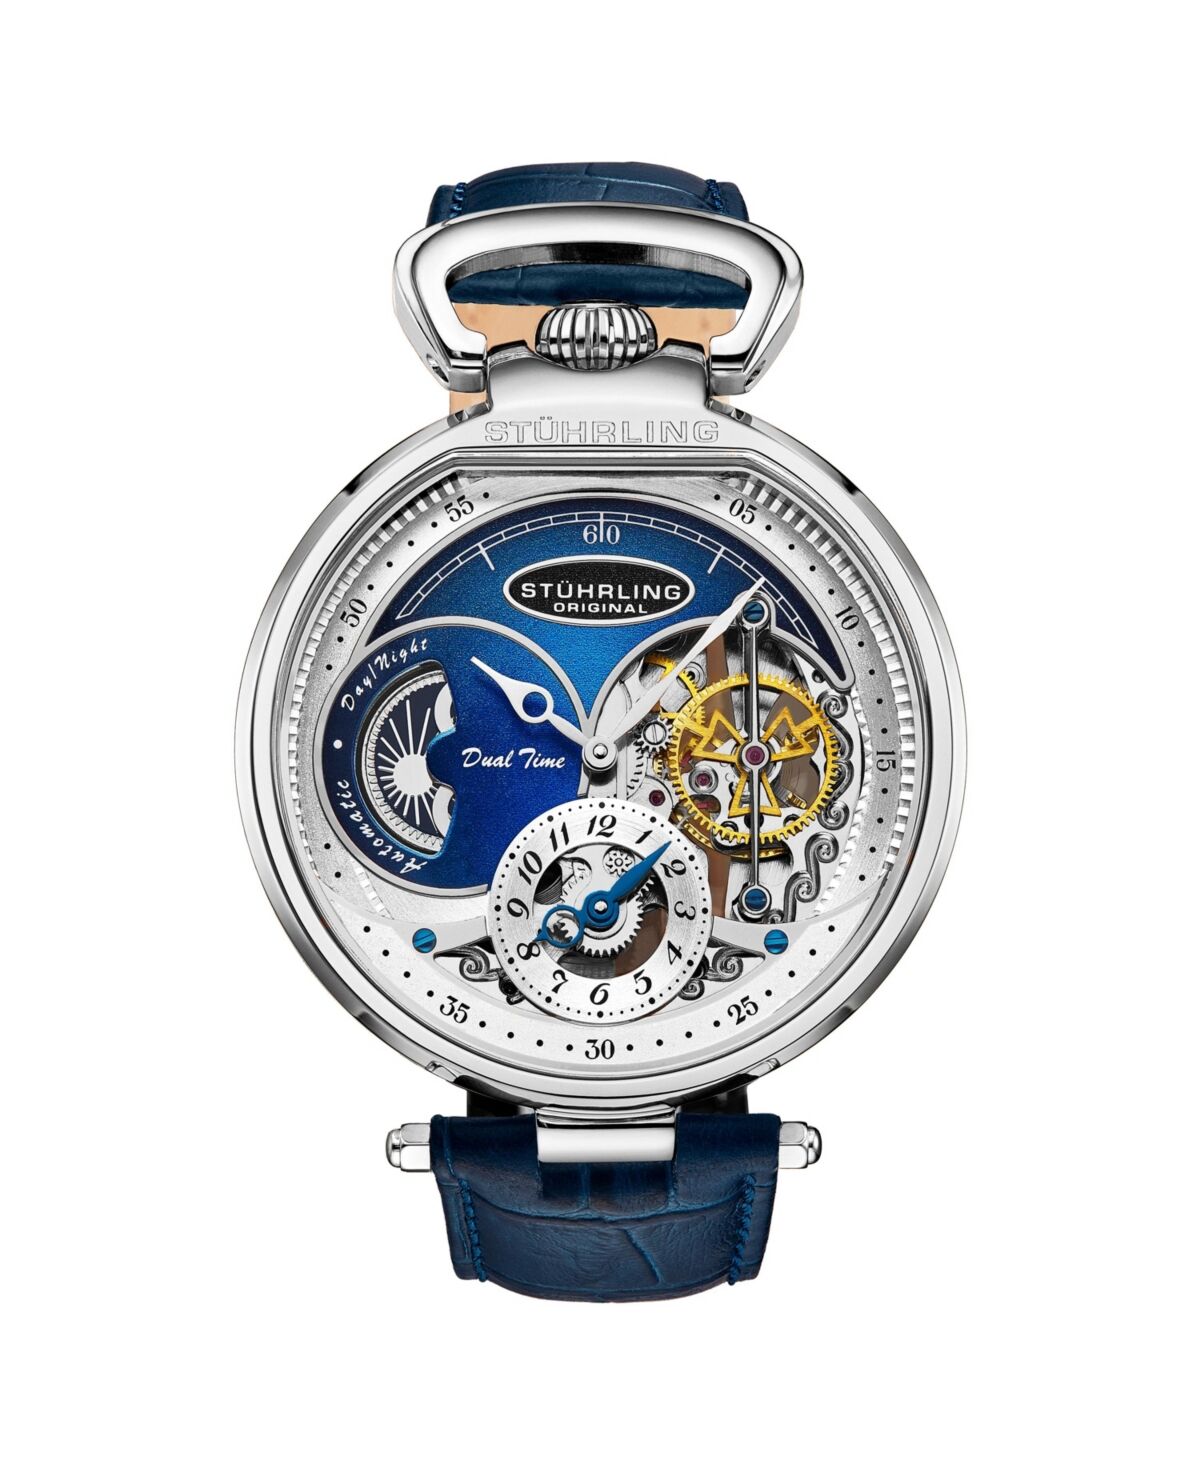 Stuhrling Men's Automatic Dual Time Alloy Case Skeleton Dial Alligator Embossed Genuine Leather Strap Watch - Blue